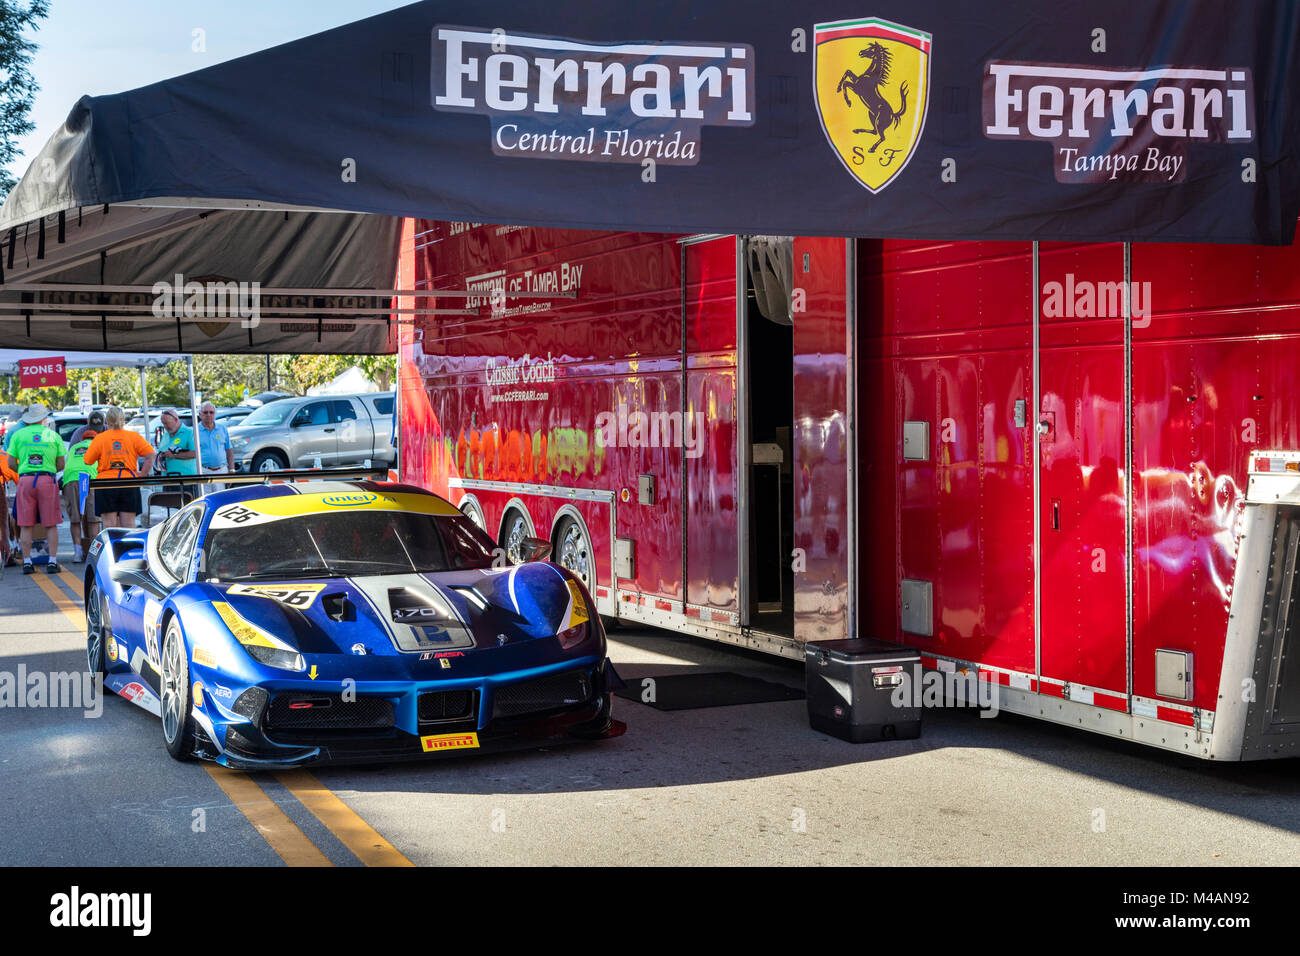 Ferrari Club race car and mobile display at 'Cars on 5th' autoshow, Naples, Florida, USA Stock Photo